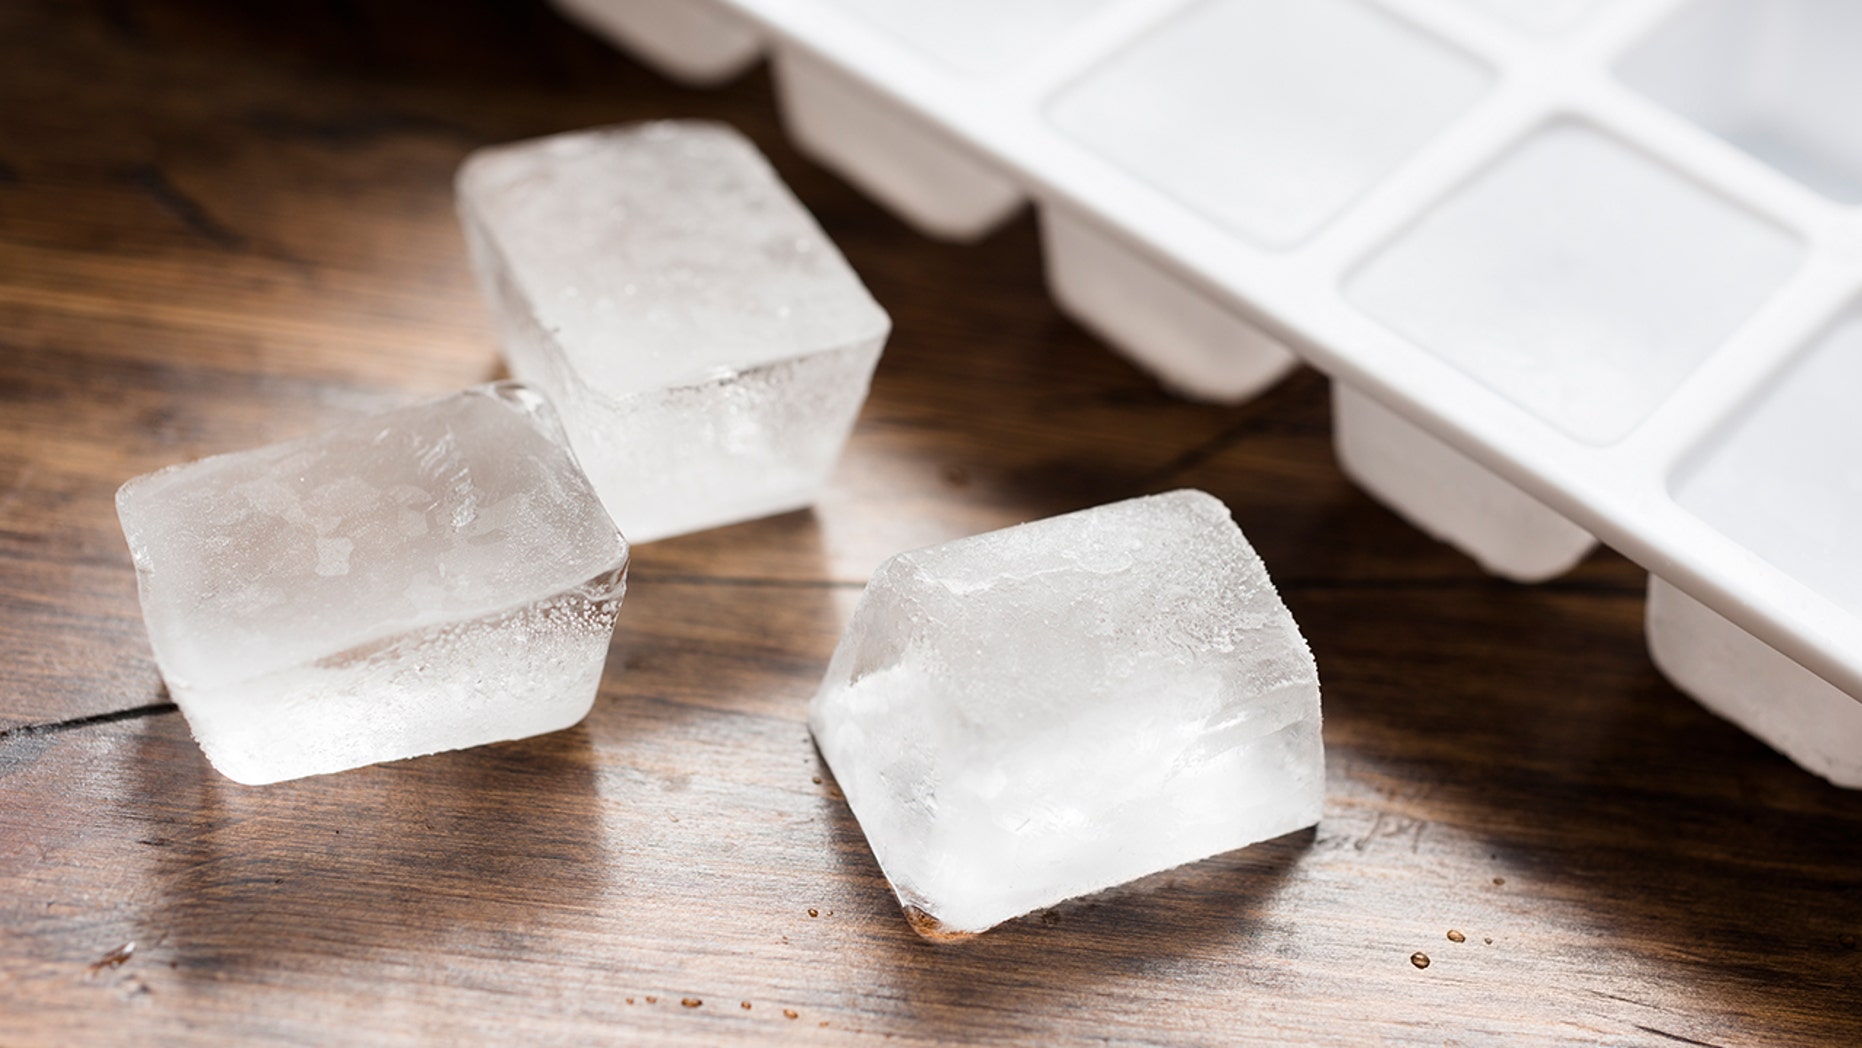 Ice cubes could contain harmful bacteria, experts warn